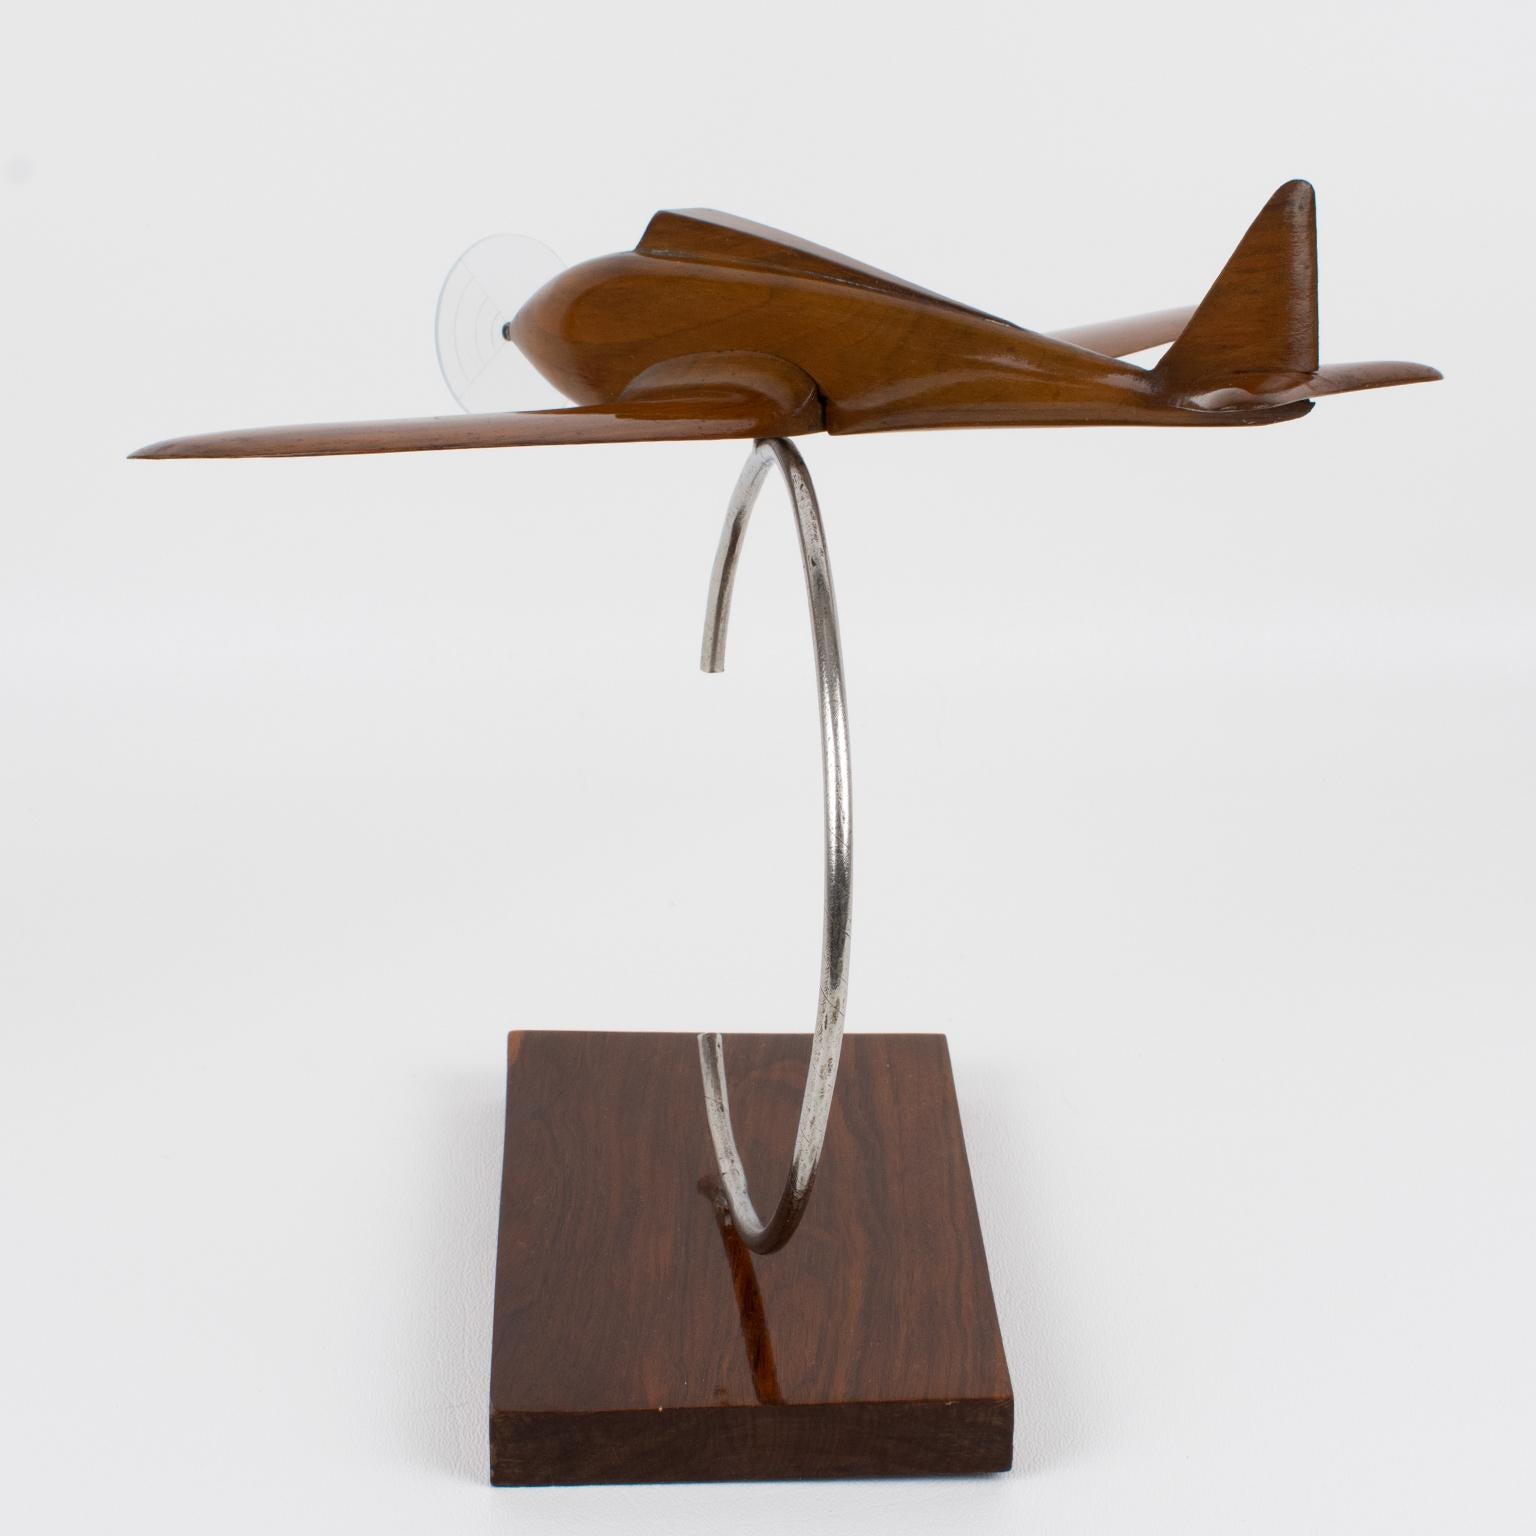 Art Deco Wood and Metal Airplane Aviation Propeller Model, France 1930s In Good Condition For Sale In Atlanta, GA